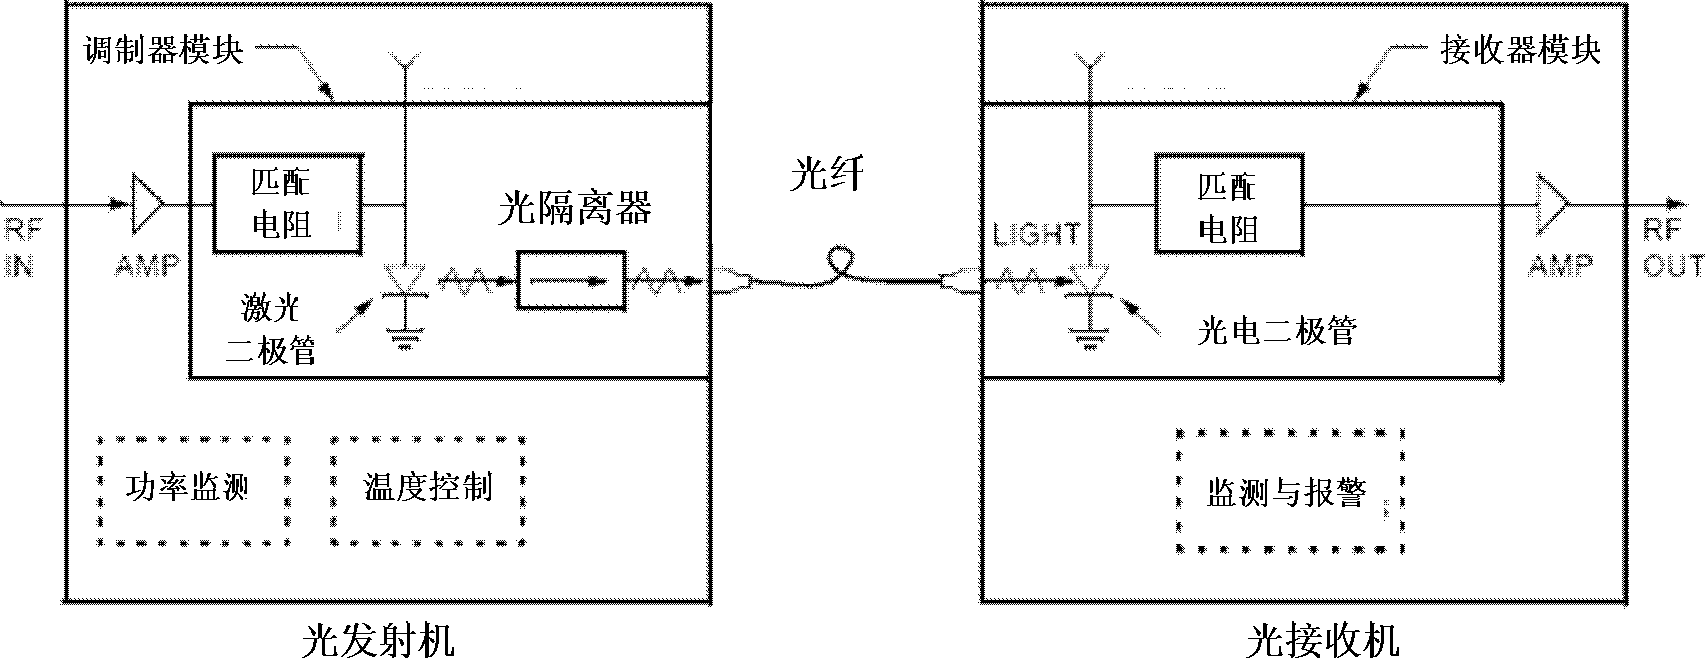 Microwave optical fiber link device for long-distance transmission of radar reference frequency signals